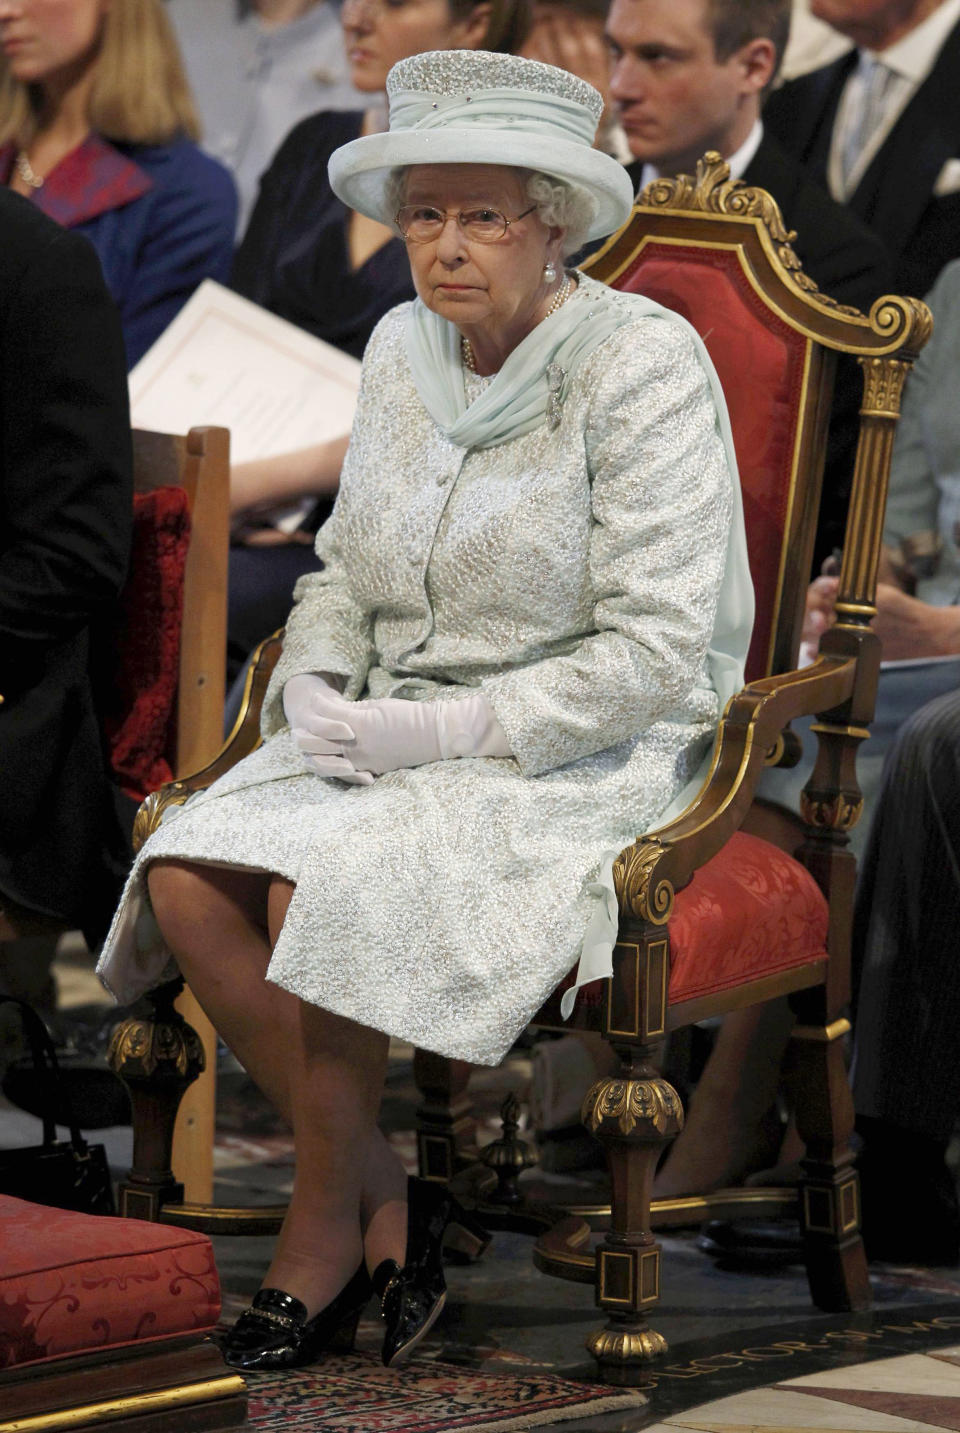 Britain's Queen Elizabeth, attends a thanksgiving service to celebrate her Diamond Jubilee at St Paul's Cathedral in central London Tuesday June 5, 2012. Four days of nationwide celebrations during which millions of people have turned out to mark Queen Elizabeth's Diamond Jubilee conclude on Tuesday with a church service and carriage procession through central London. (AP Photo/Suzanne Plunkett, Pool)